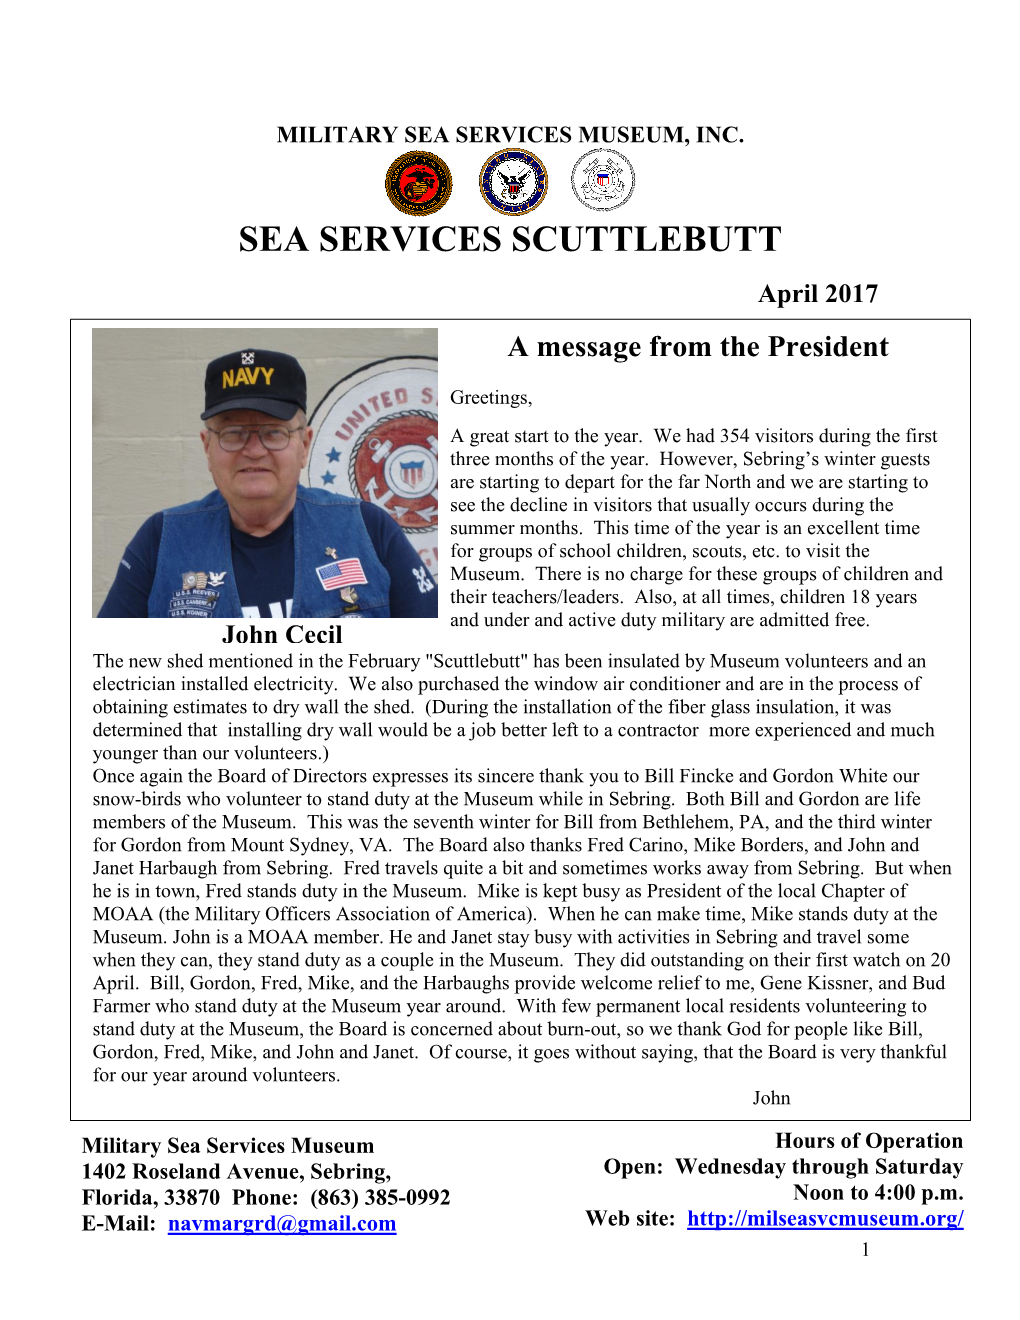 SEA SERVICES SCUTTLEBUTT April 2017 a Message from the President